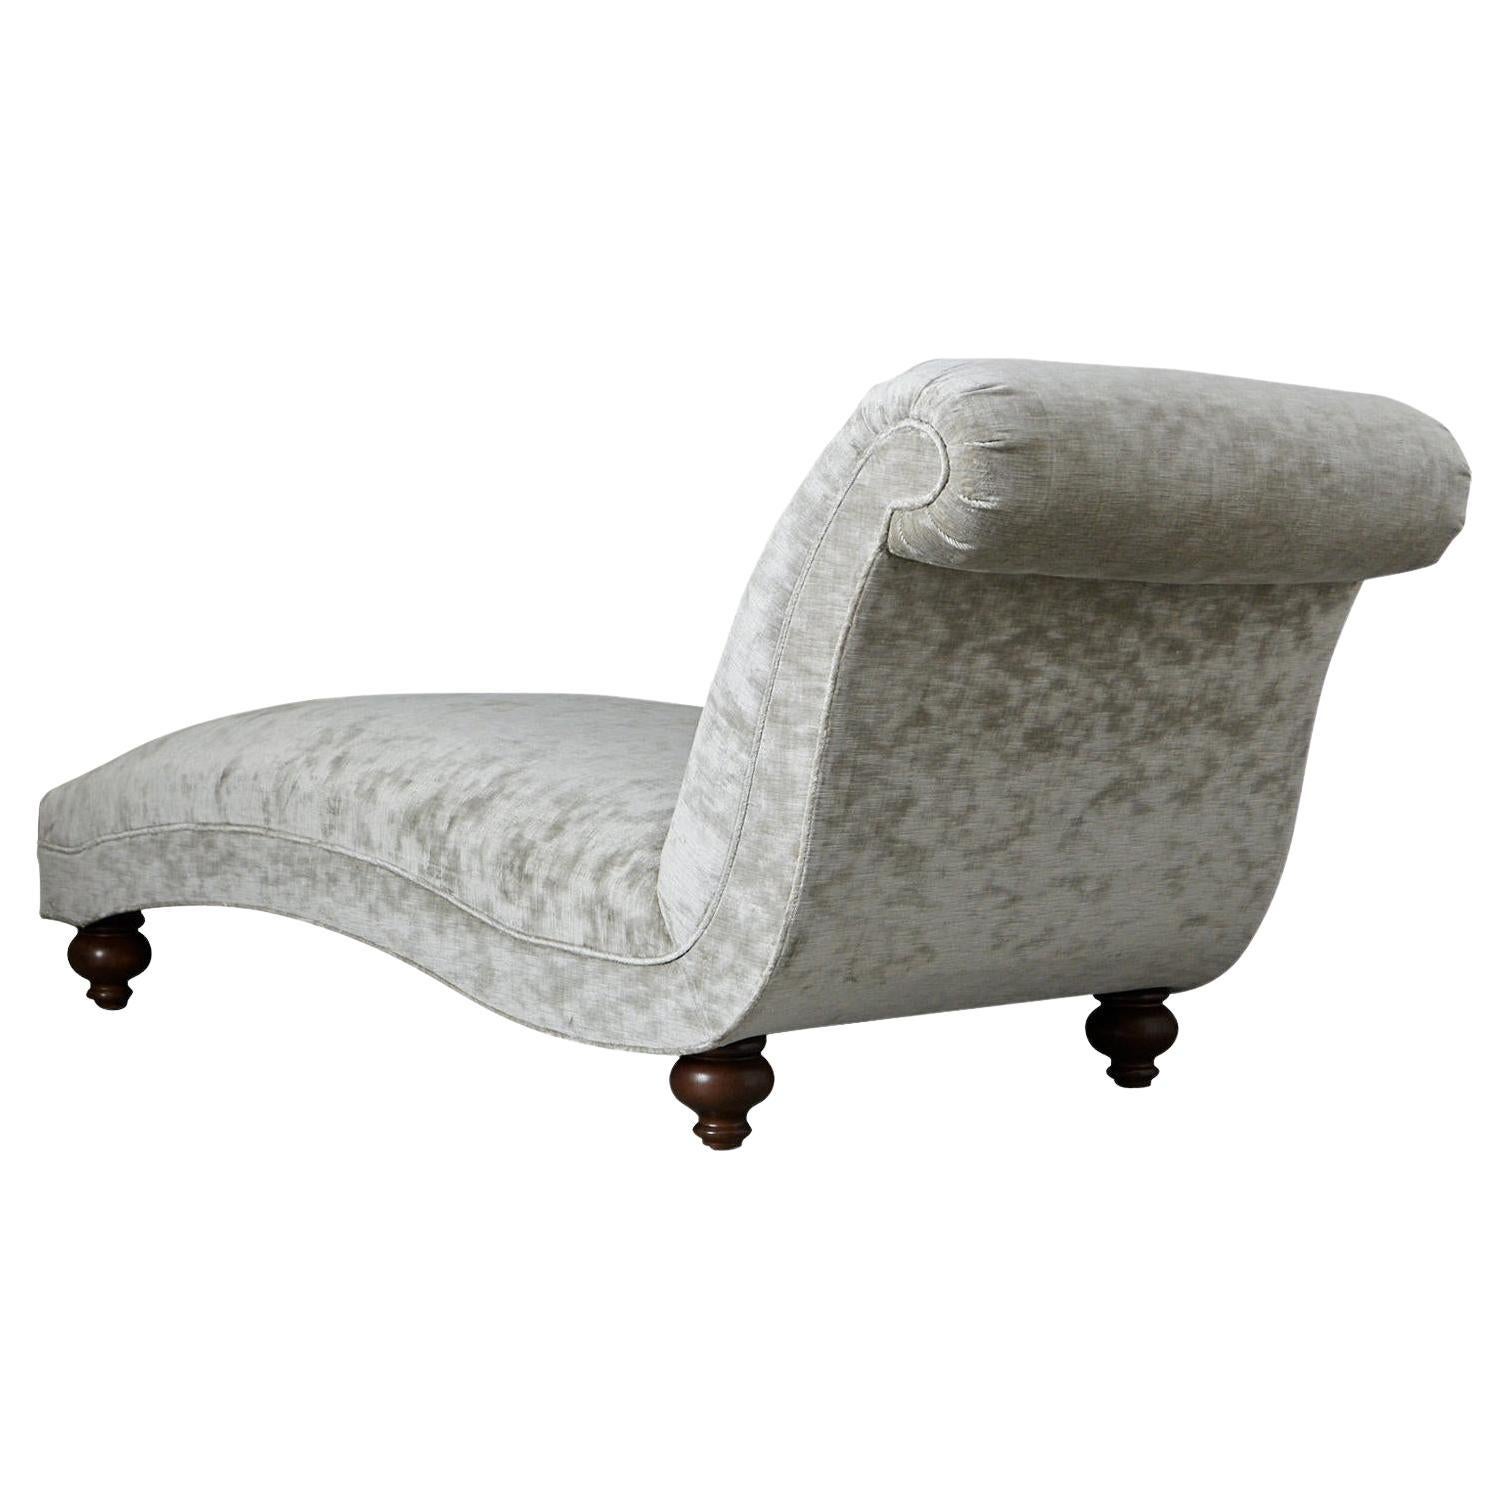 French Chaise Longue with New Upholstery in Striae Velvet, circa 1930s For Sale